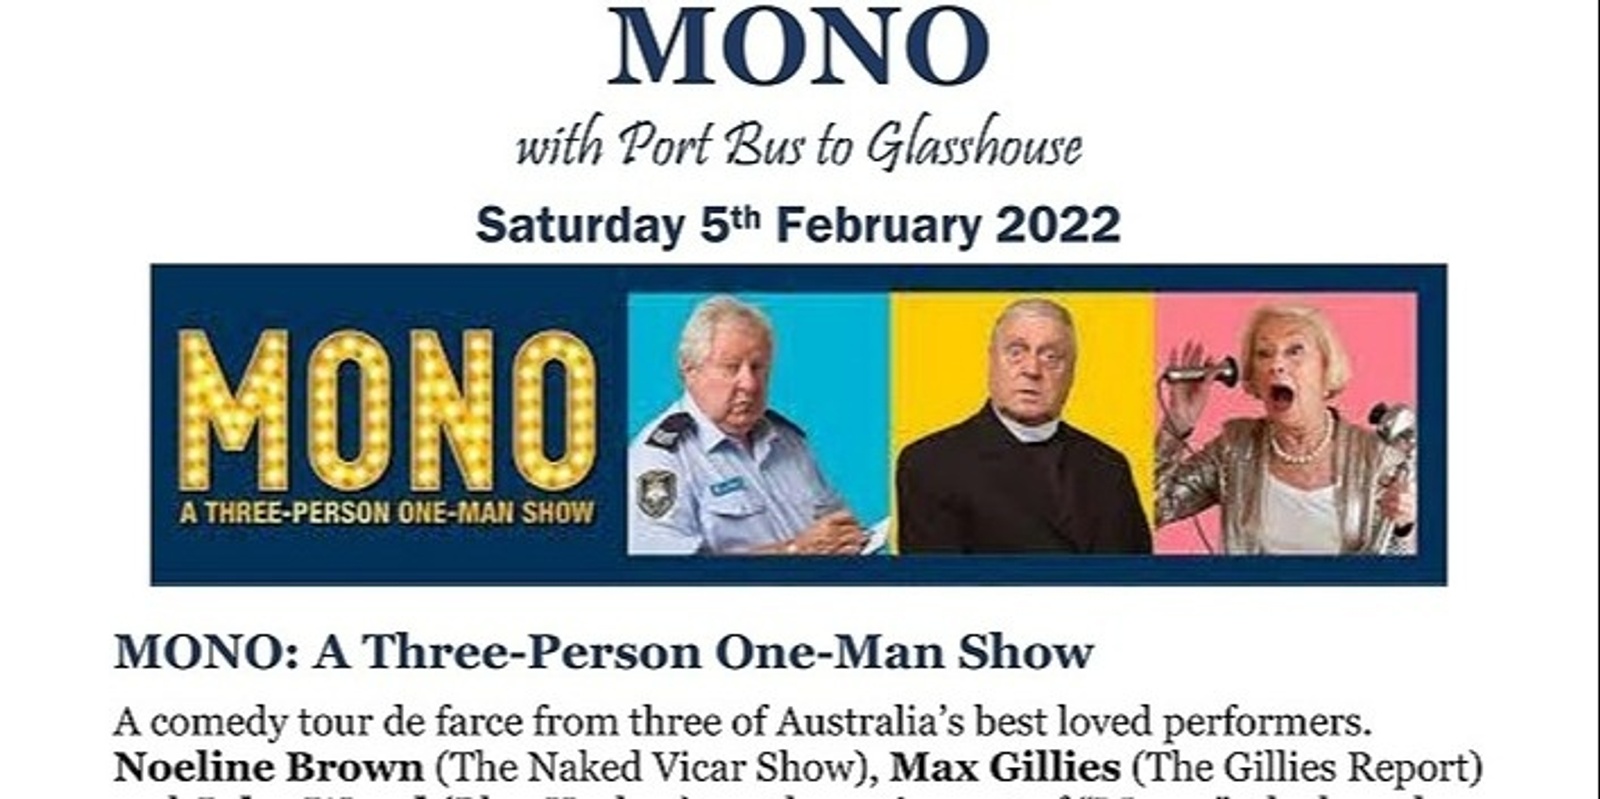 Banner image for MONO with Port Bus to Glasshouse